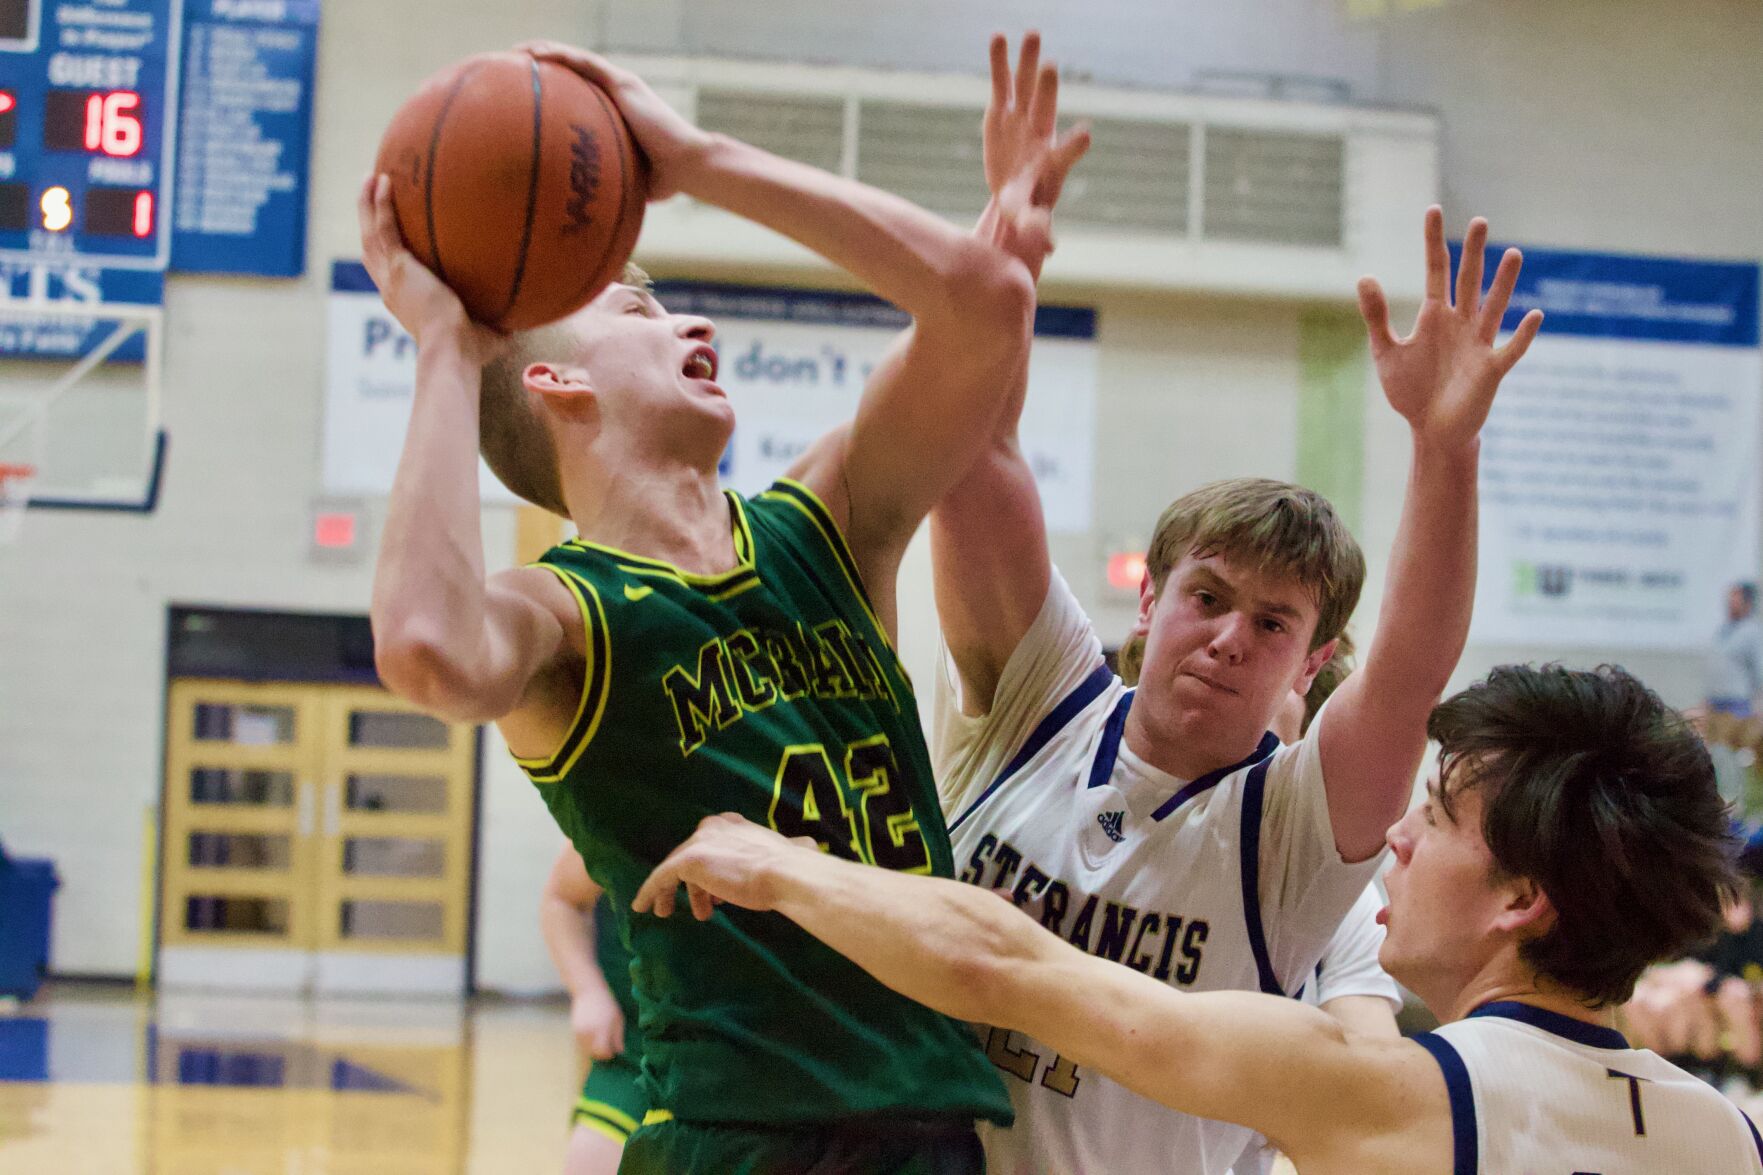 High School Basketball Roundup: McBain edges out Traverse City St. Francis, Evan Haverkamp shines with 17 points